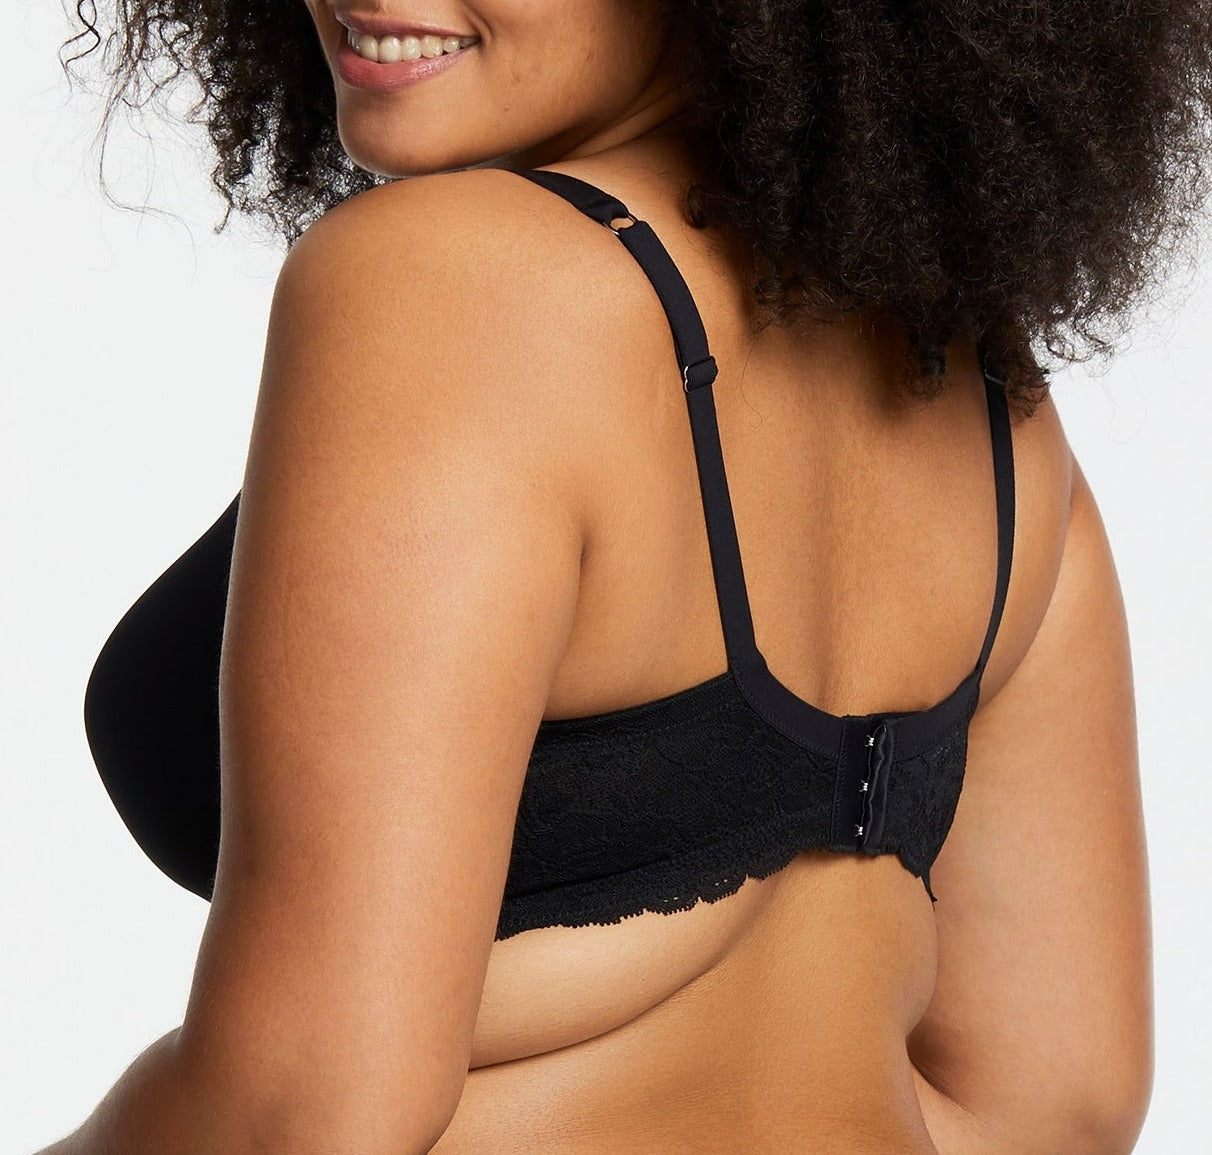 Size 36G Full Coverage Plus Size Bras: Cups B-K